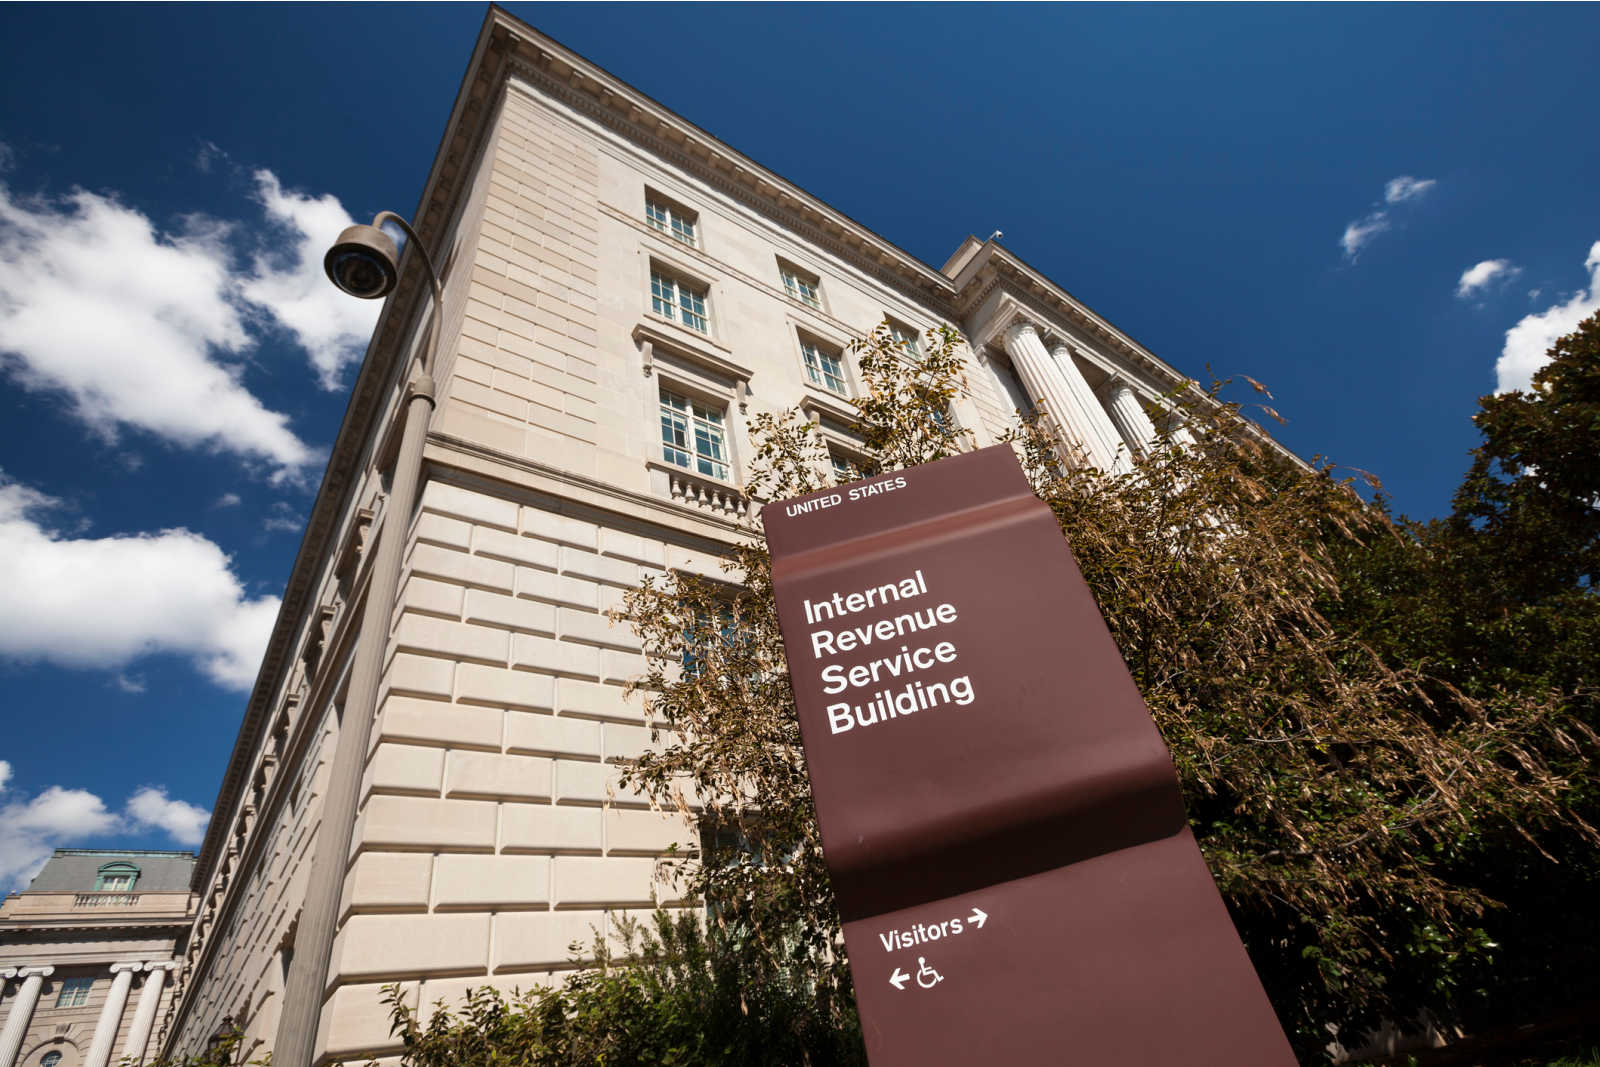 irs-criminal-investigation-division-warns-of-child-tax-credit-scams